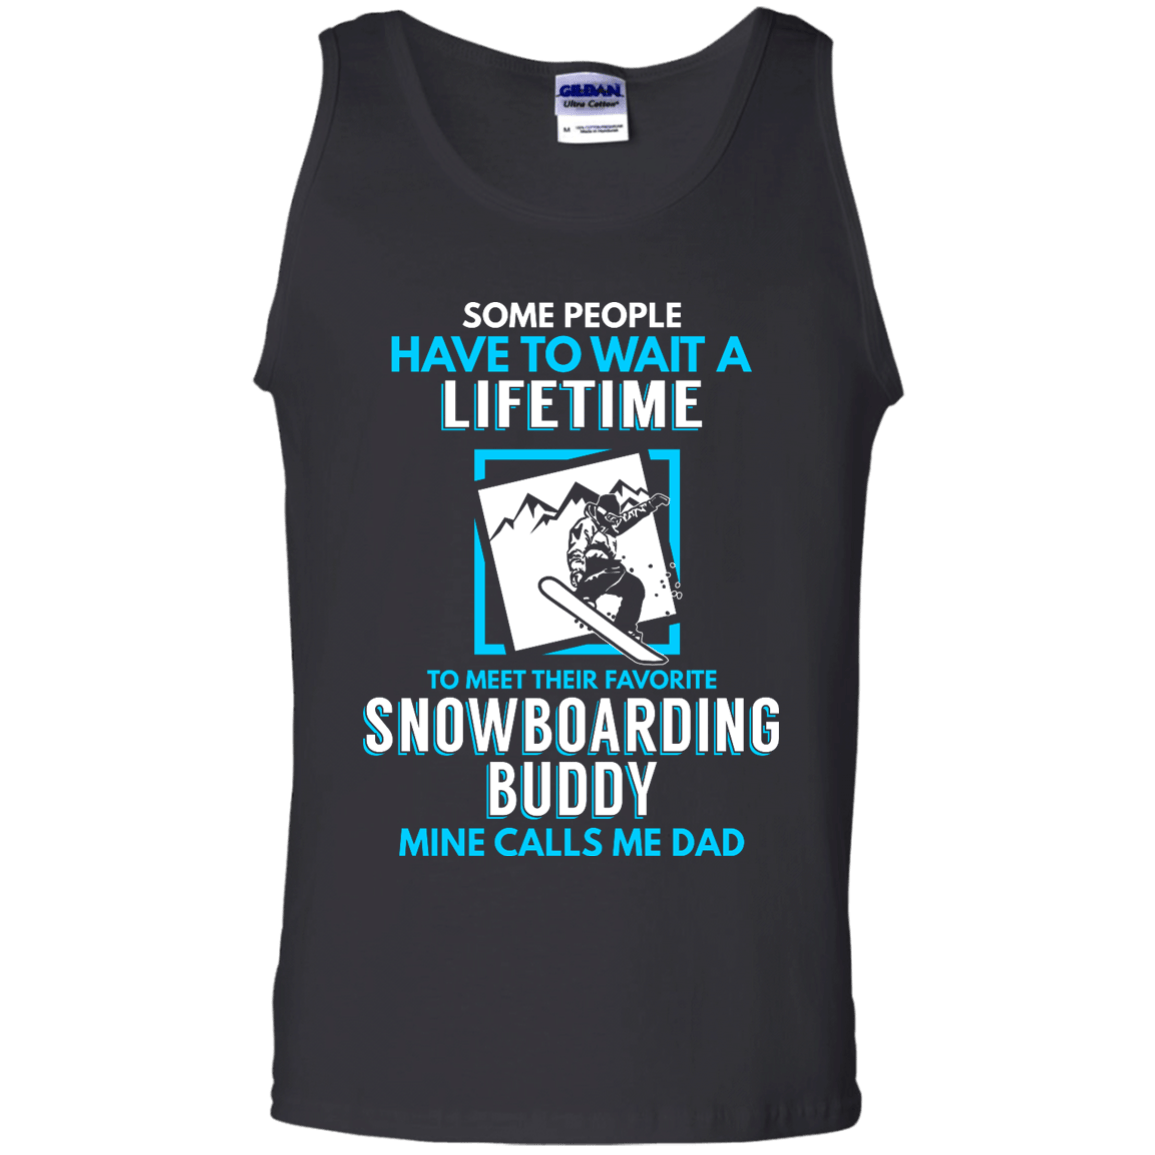 Some People Have To Wait A Lifetime To Meet Their Their Favorite Snowboarding Buddy Mine Calls Me Dad - Tank Tops - Powderaddicts